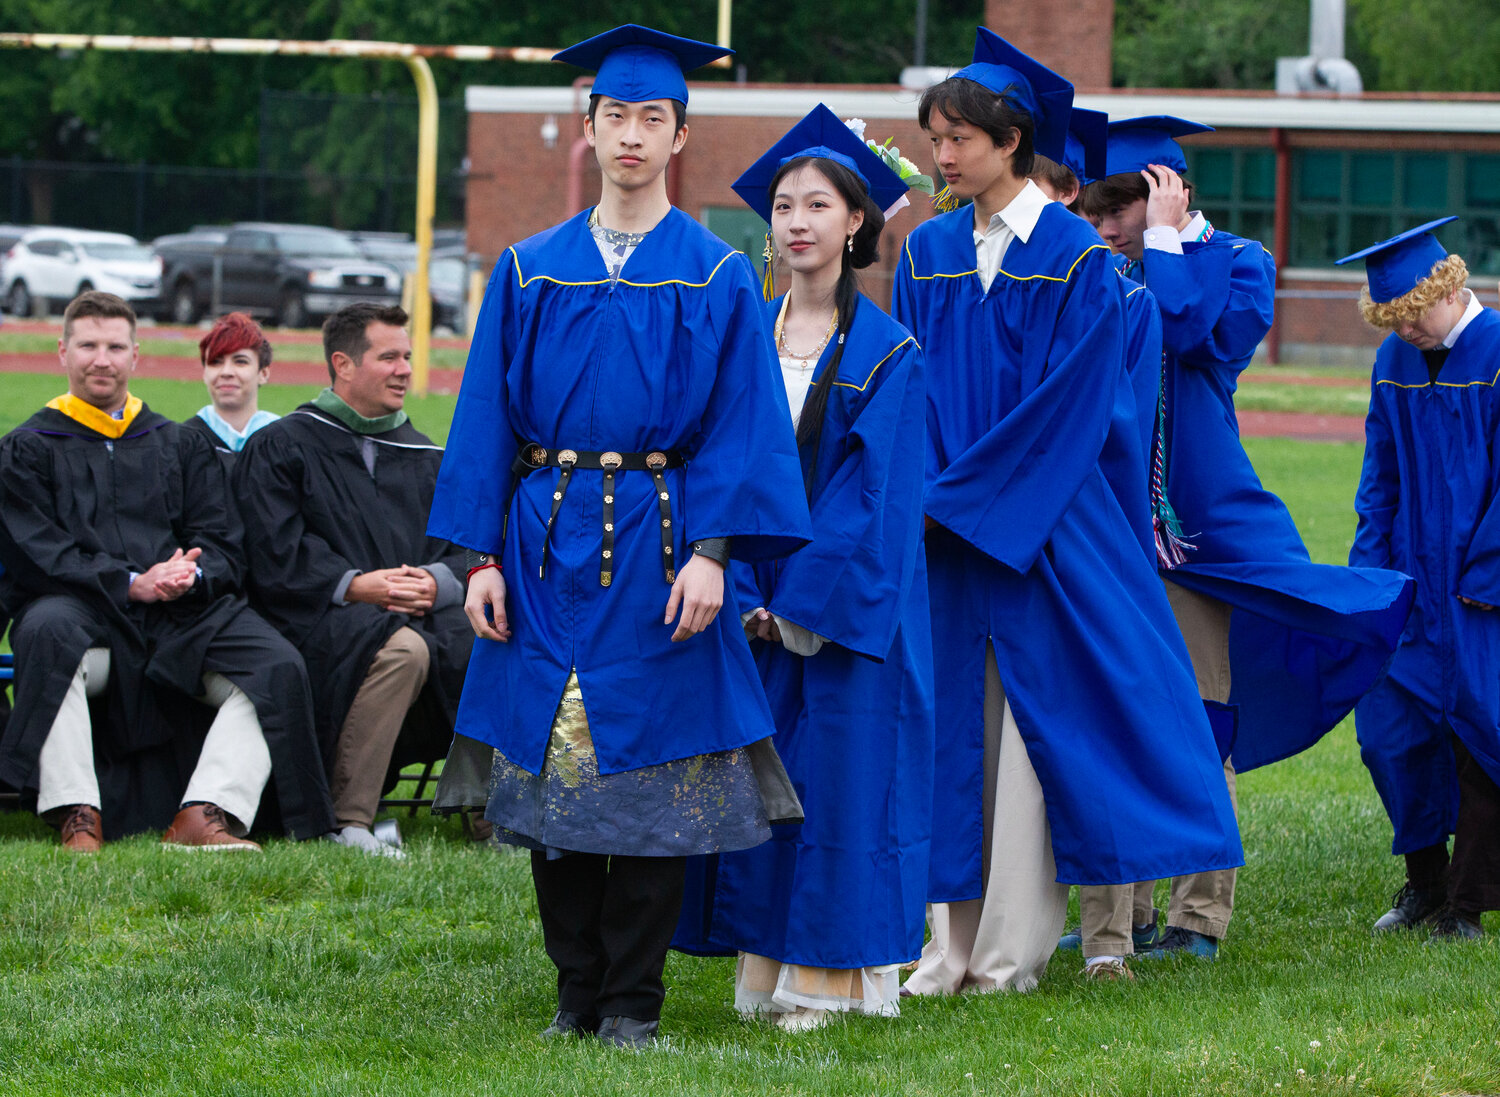 Boheng Huang, Jialin Huang and Matthew Huang (from left to right) wait to receive their diplomas at Sunday’s graduation ceremony.